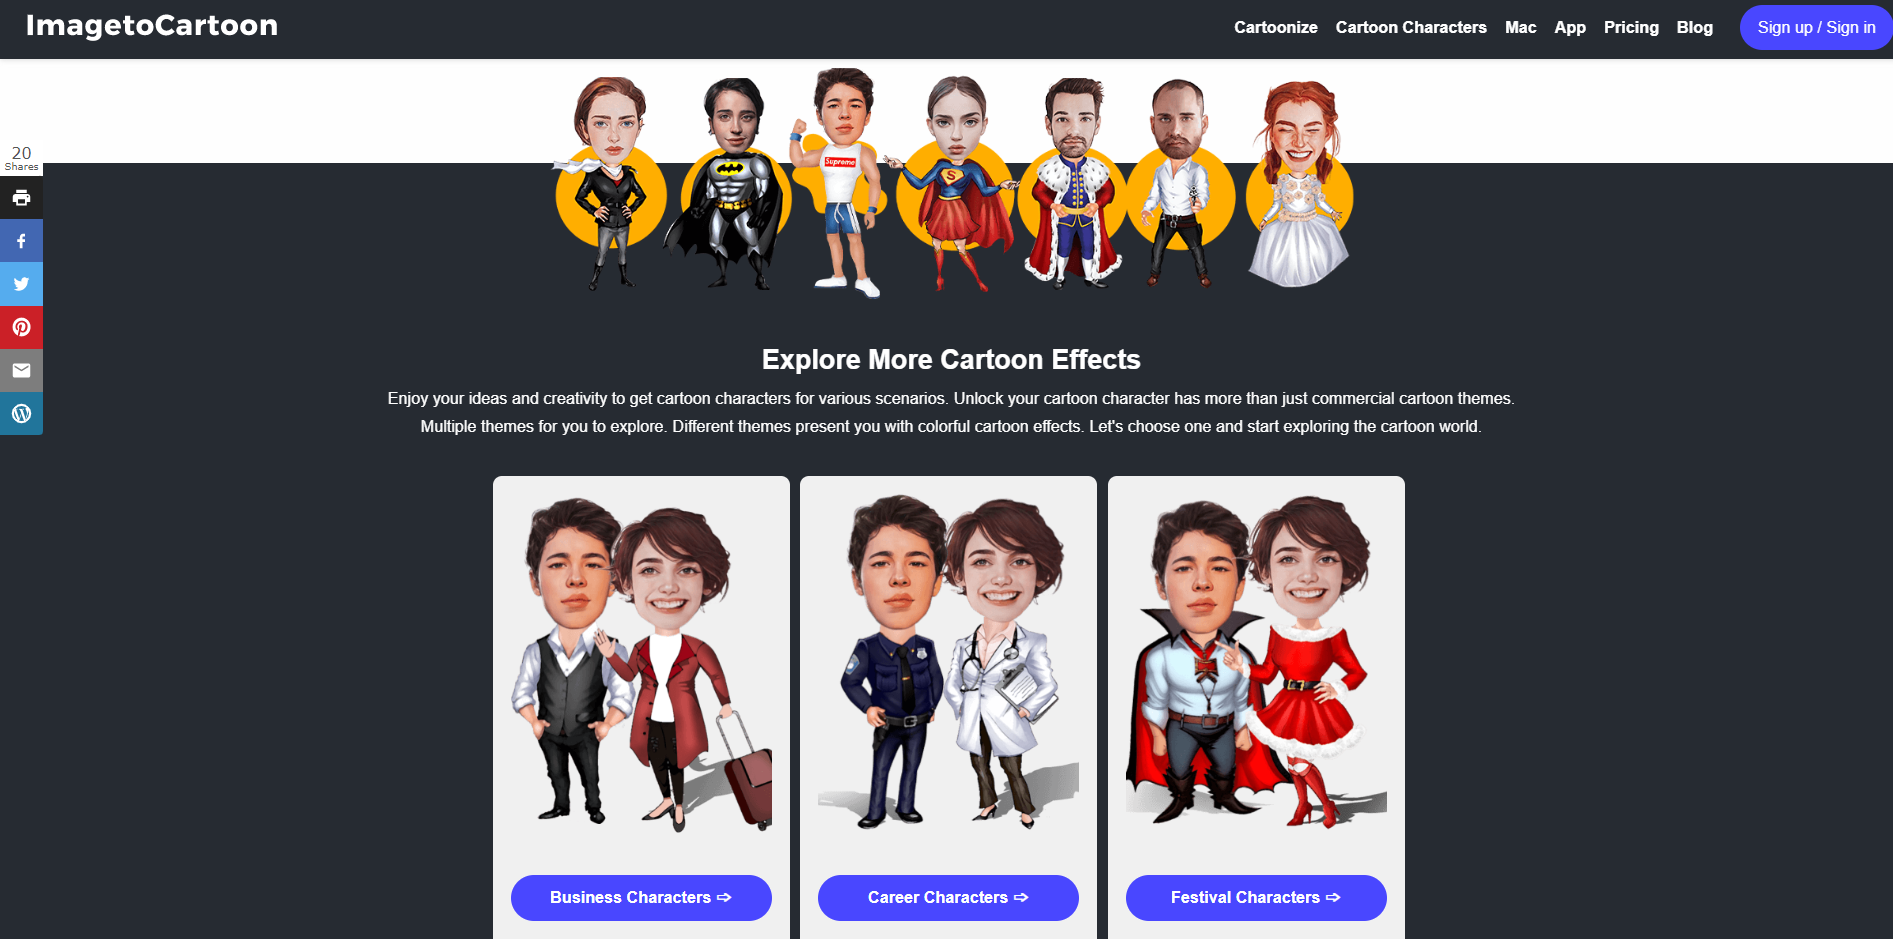 The Magic of ImageToCartoon: Dive into the World of Cartoonized Self-Expressions